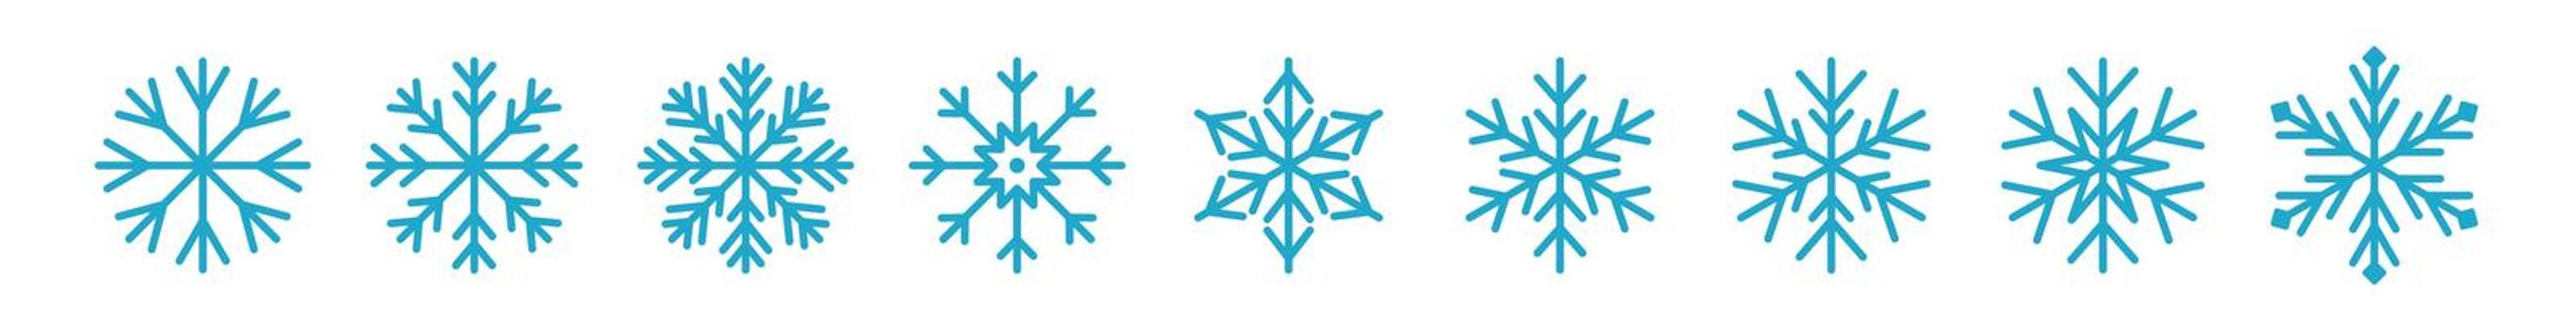 Set of icy snowflakes symbol vector illustration